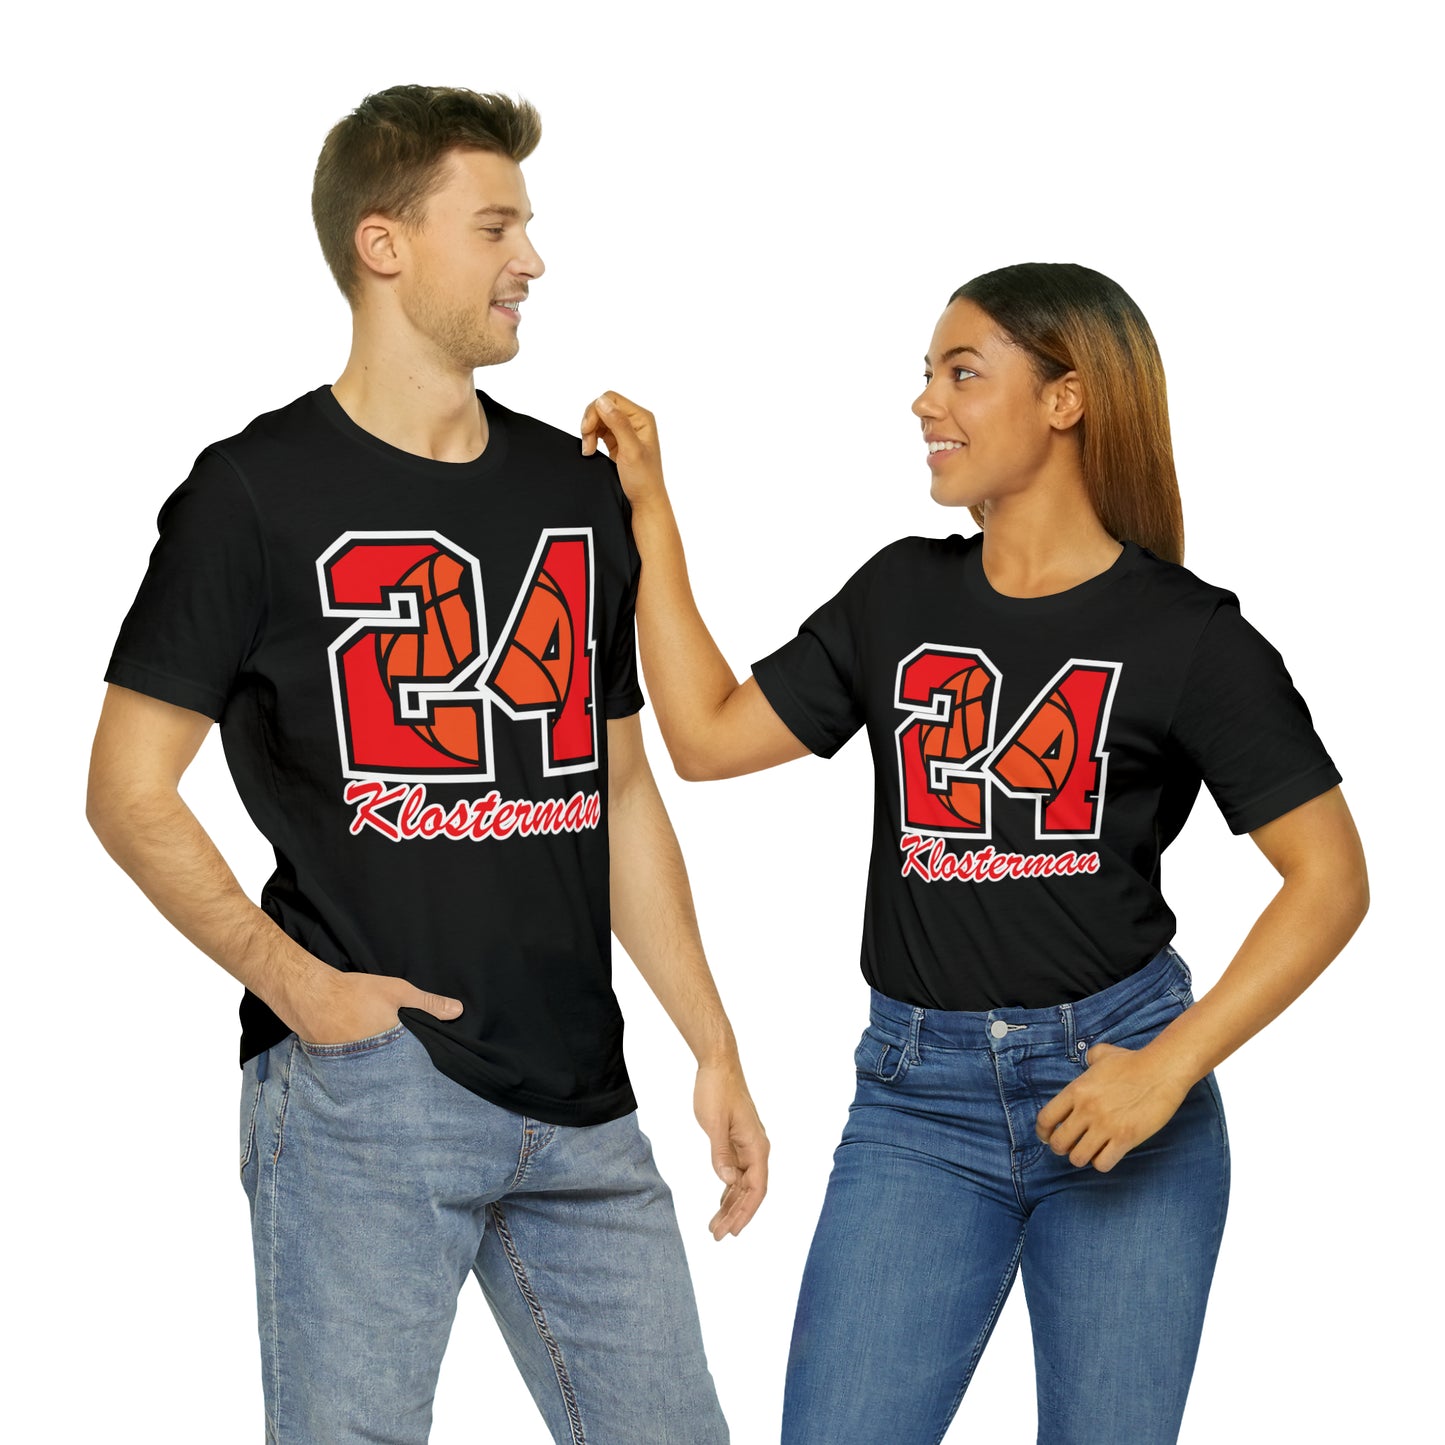 PERSONALIZED - Basketball Name/Number Short Sleeve Tee